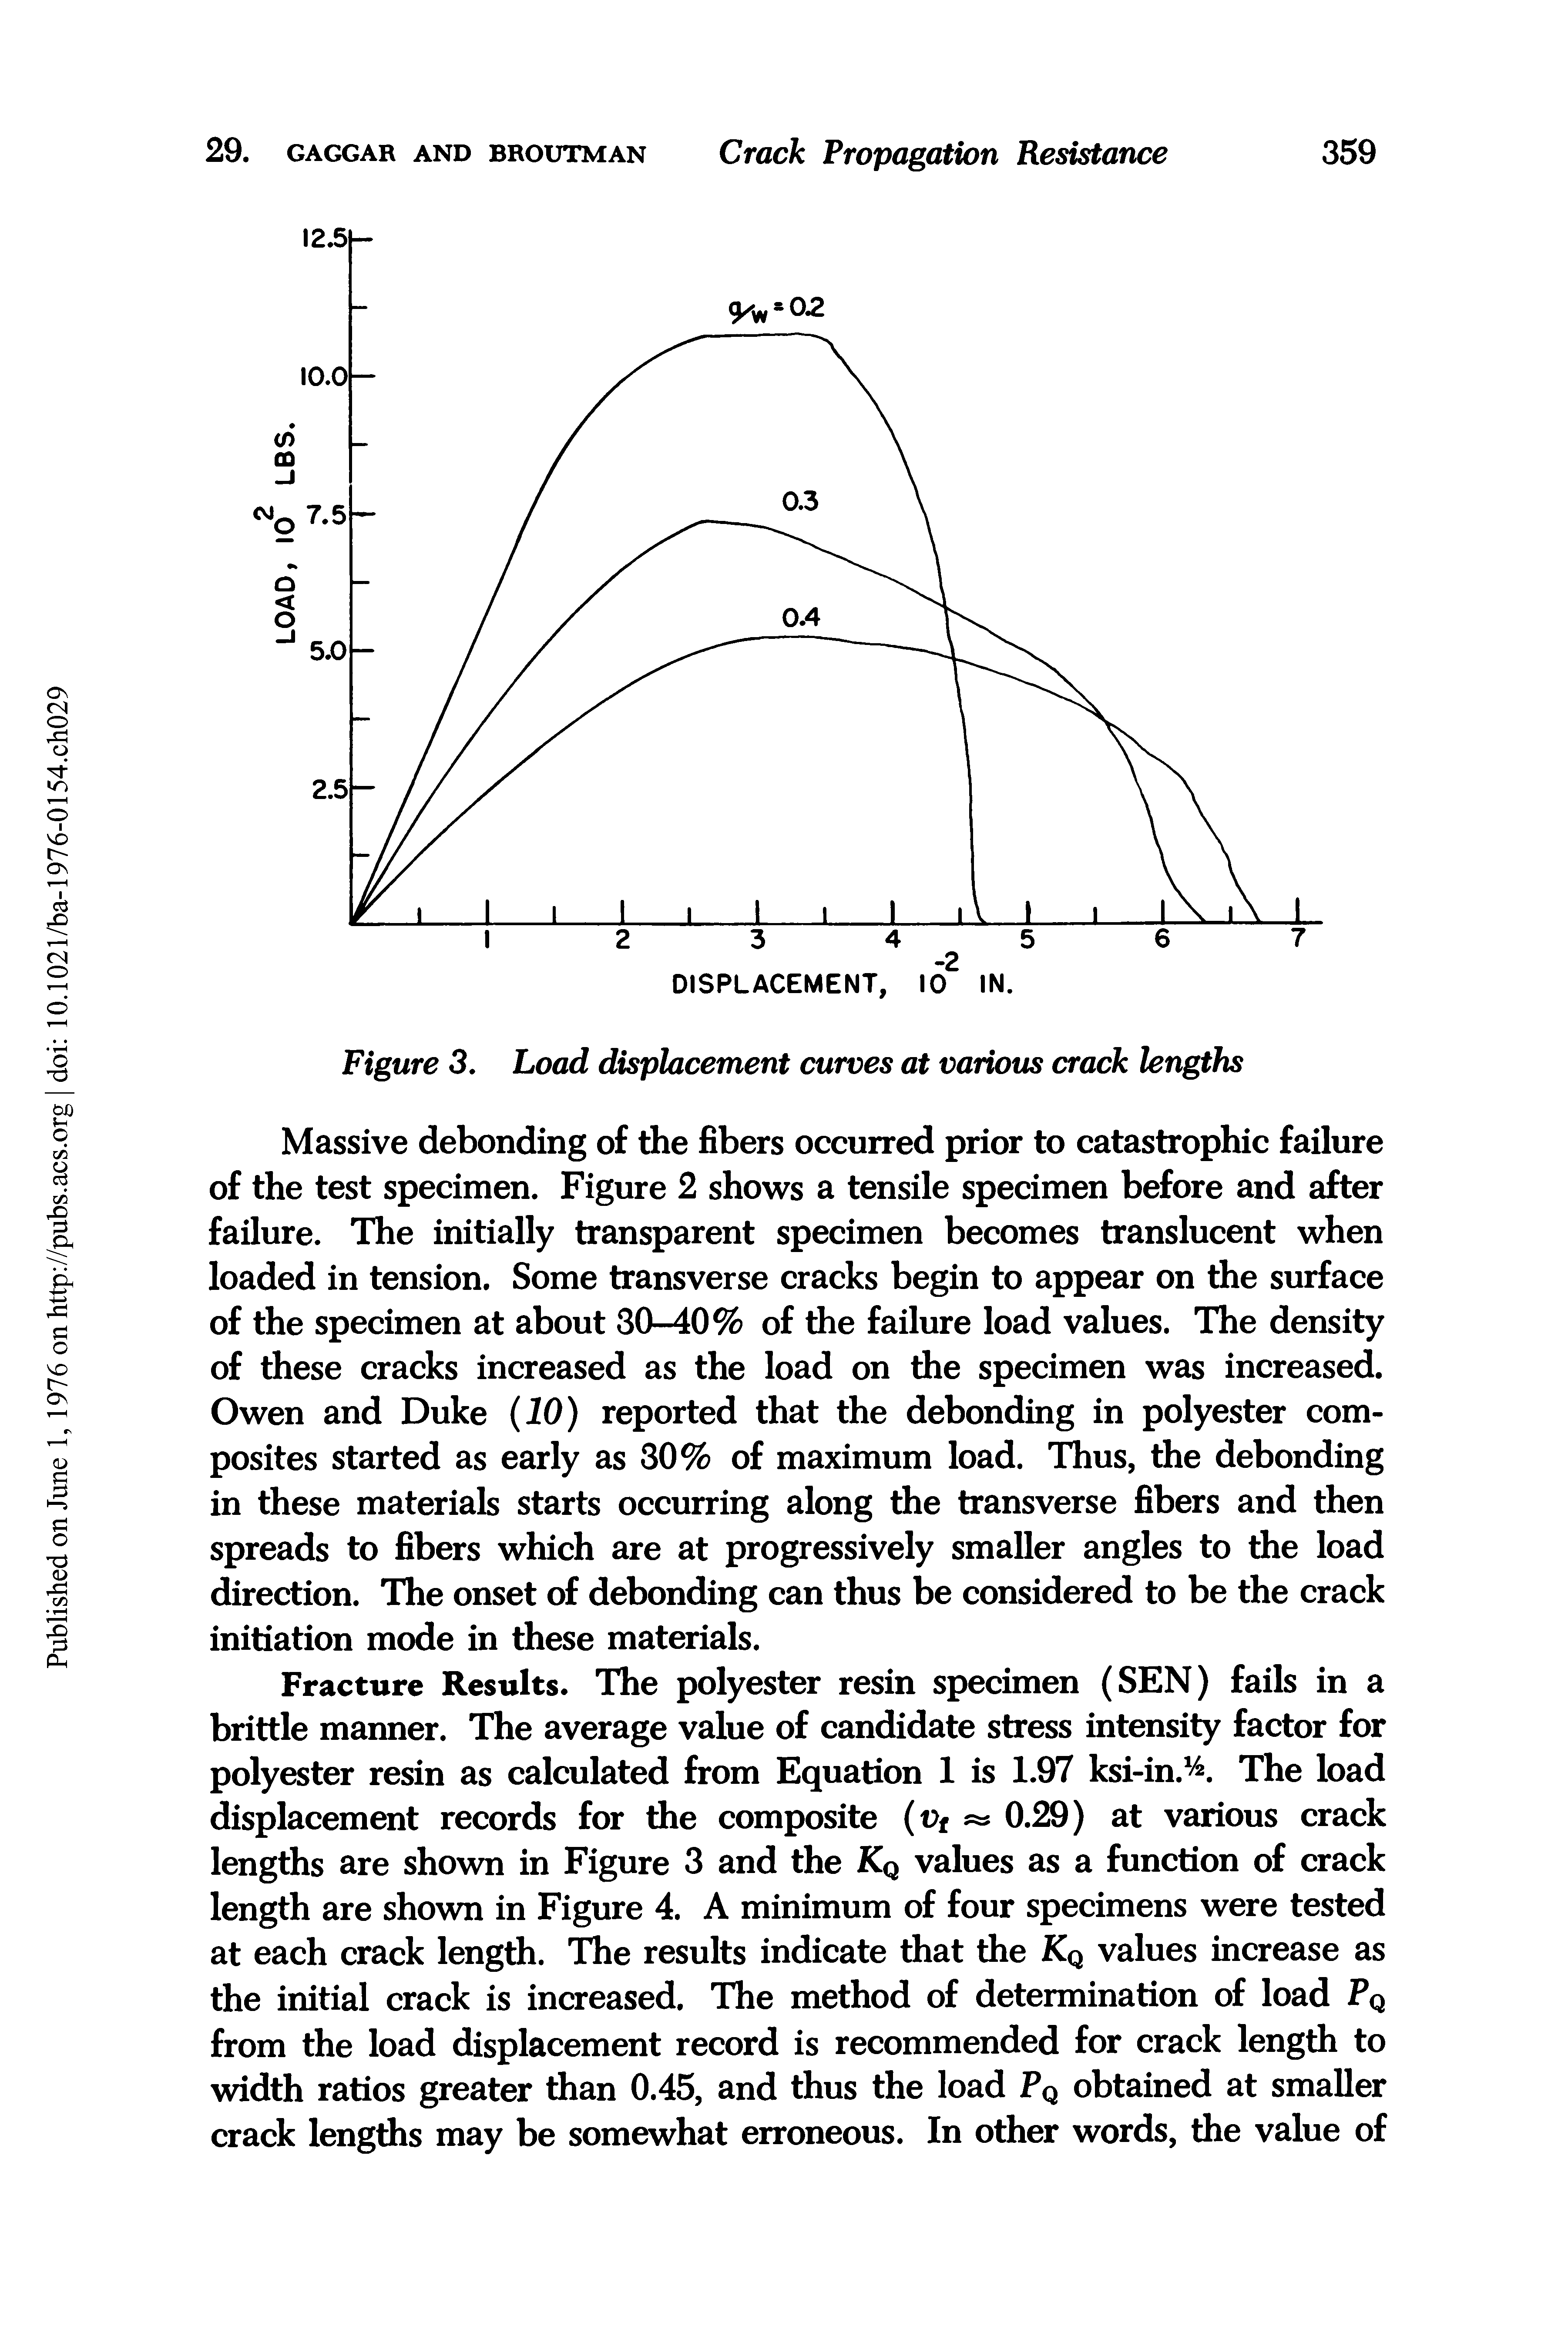 Figure 3. Load displacement curves at various crack lengths...